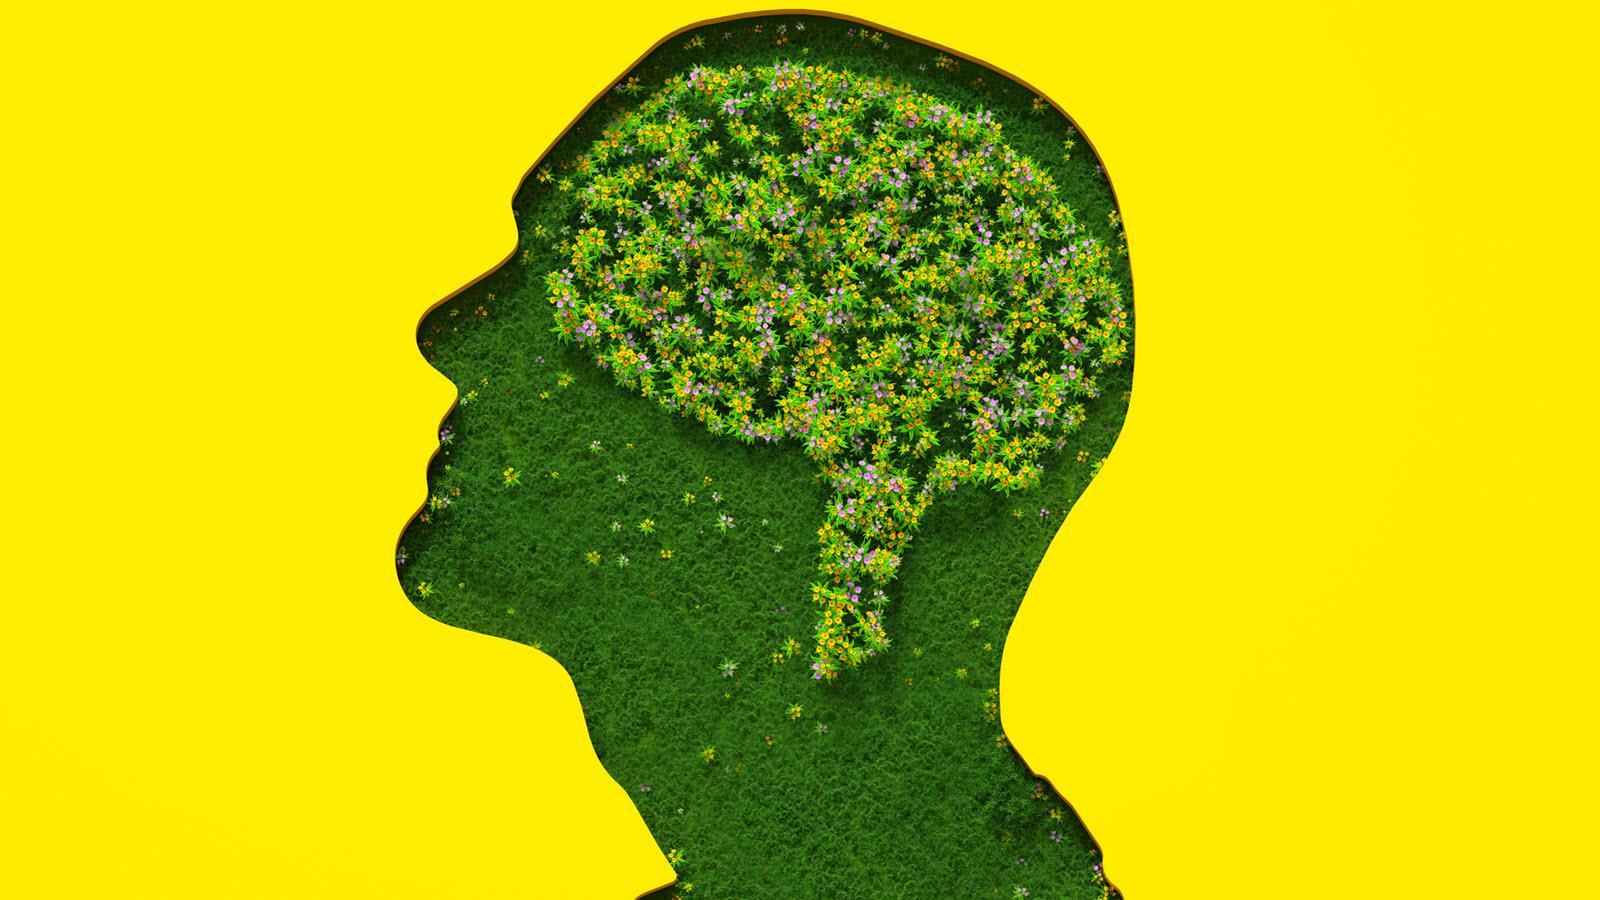 profile image illustration of greenery and flowers growing in the brain 